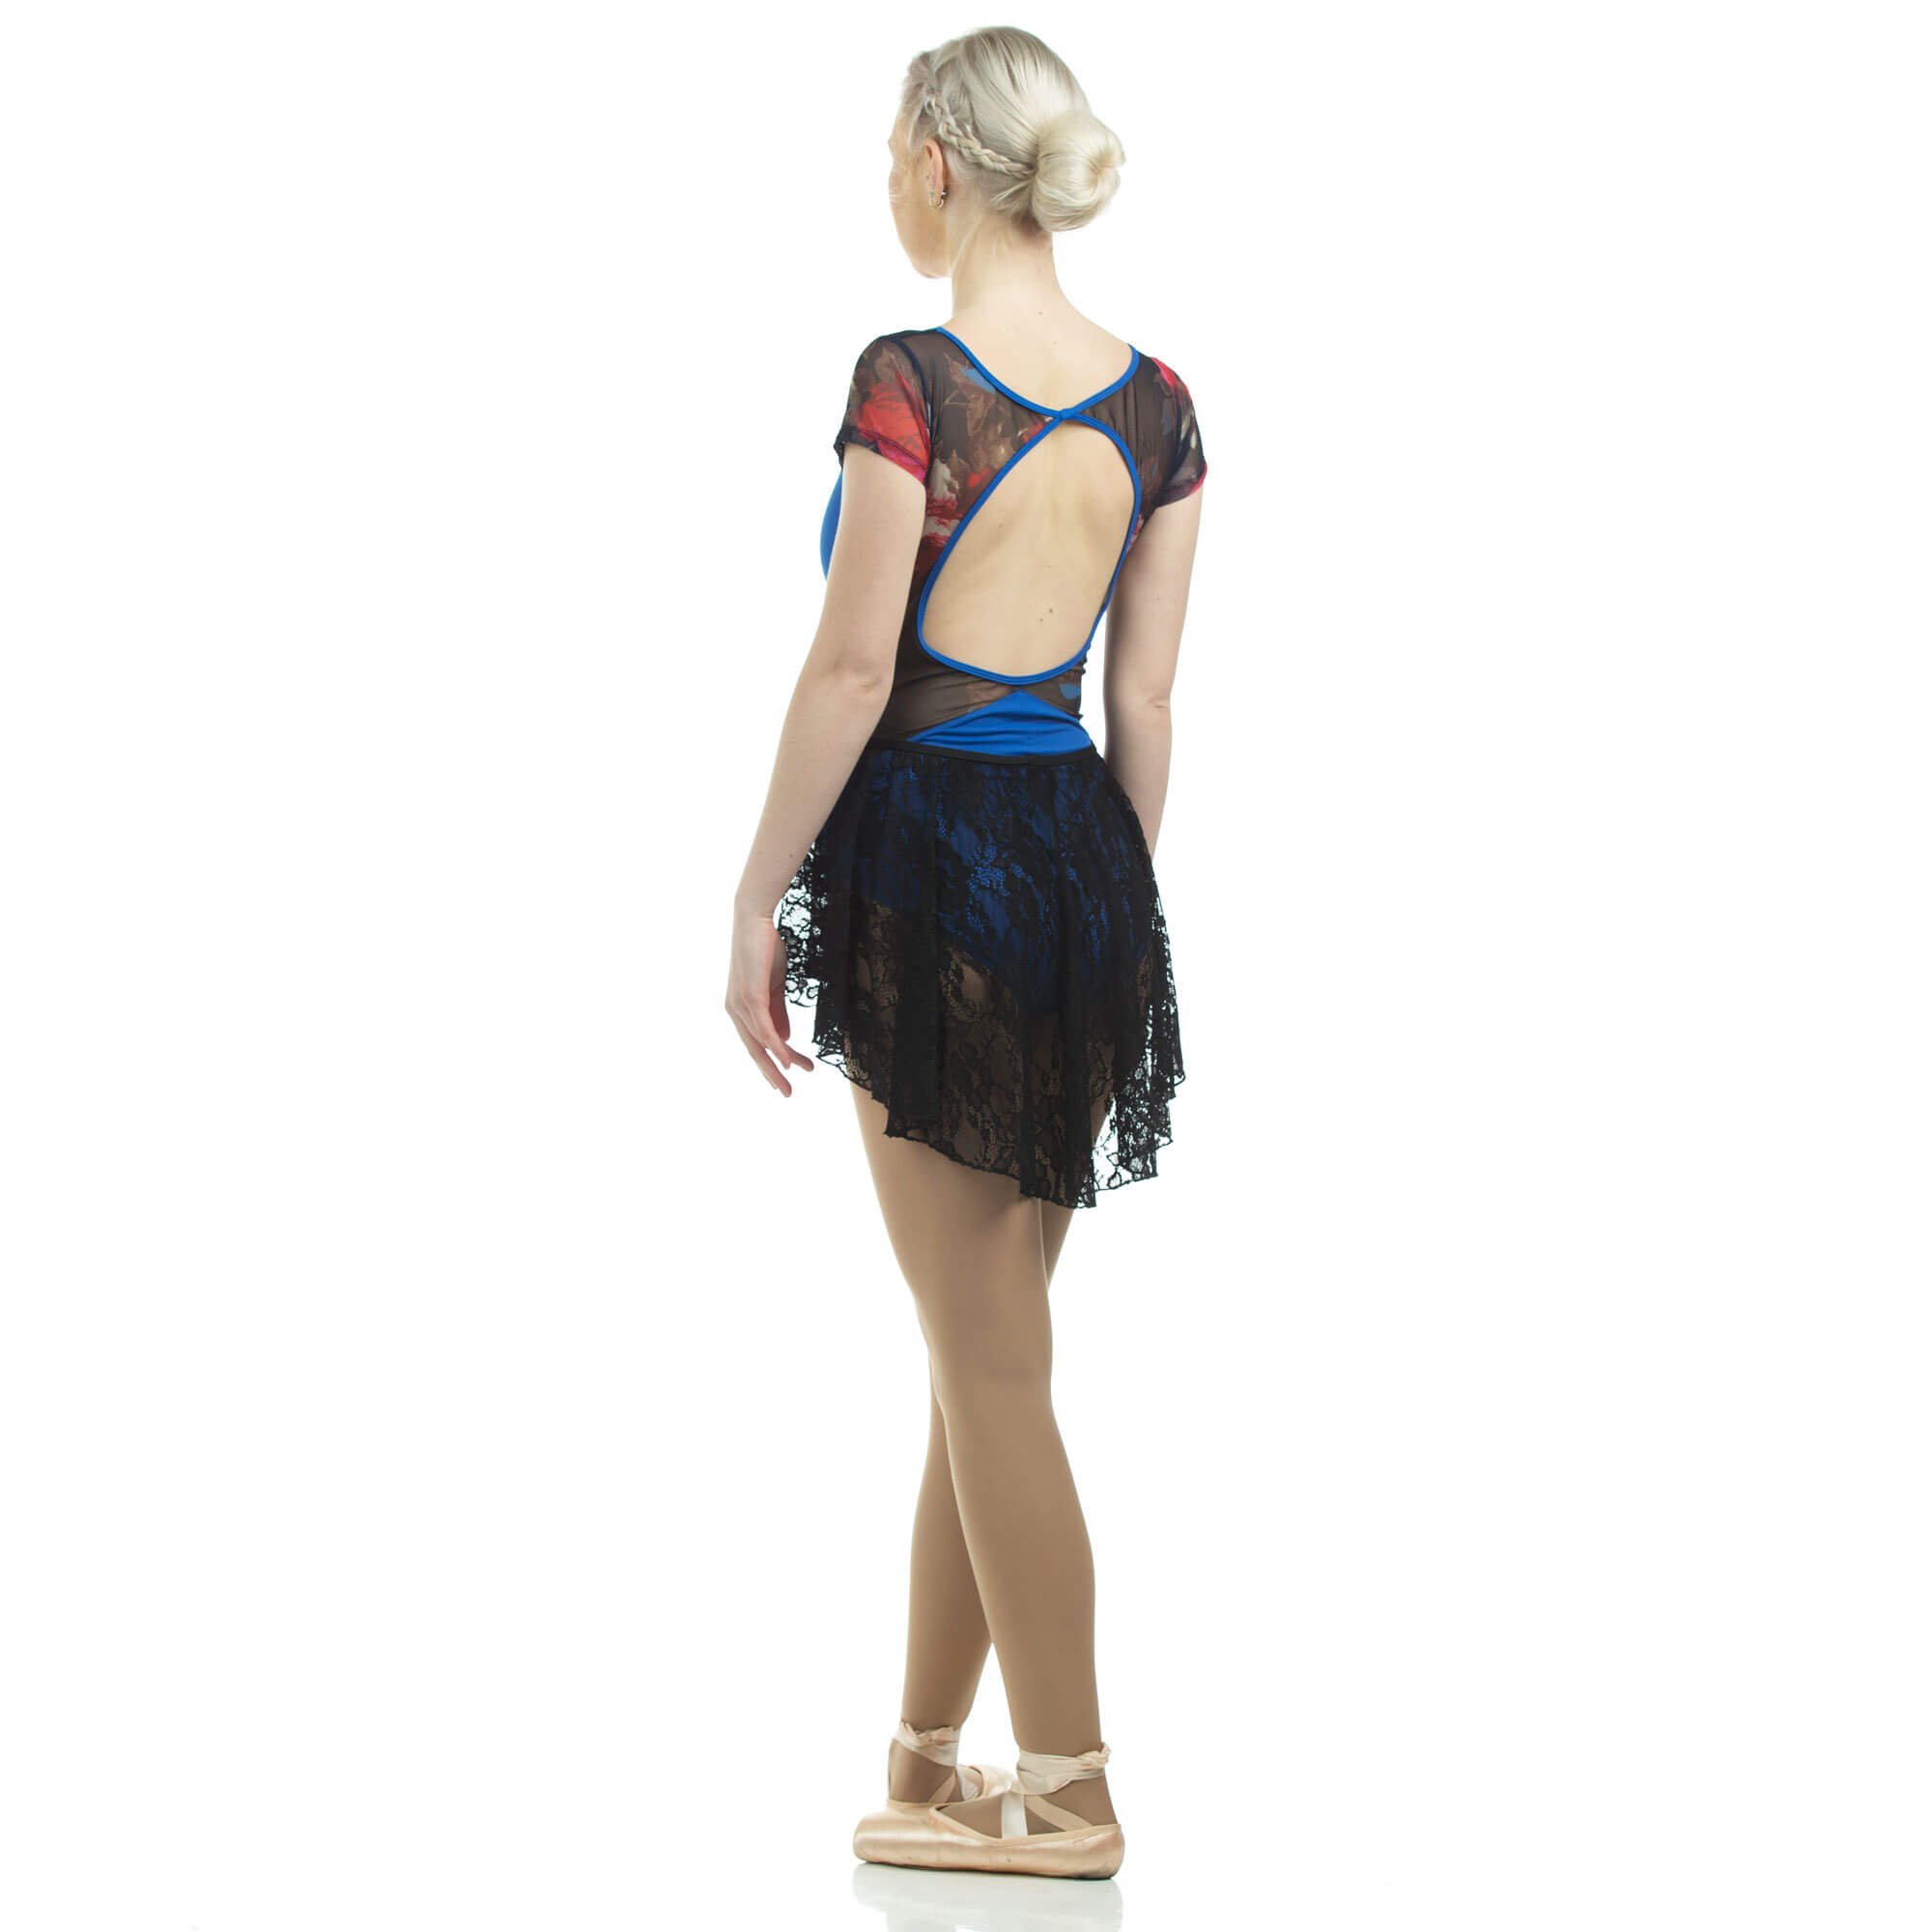 Danzcue Adult Ballet Dance Skirt Stretch Asymmetrical Lace High-Low Hemline - Click Image to Close